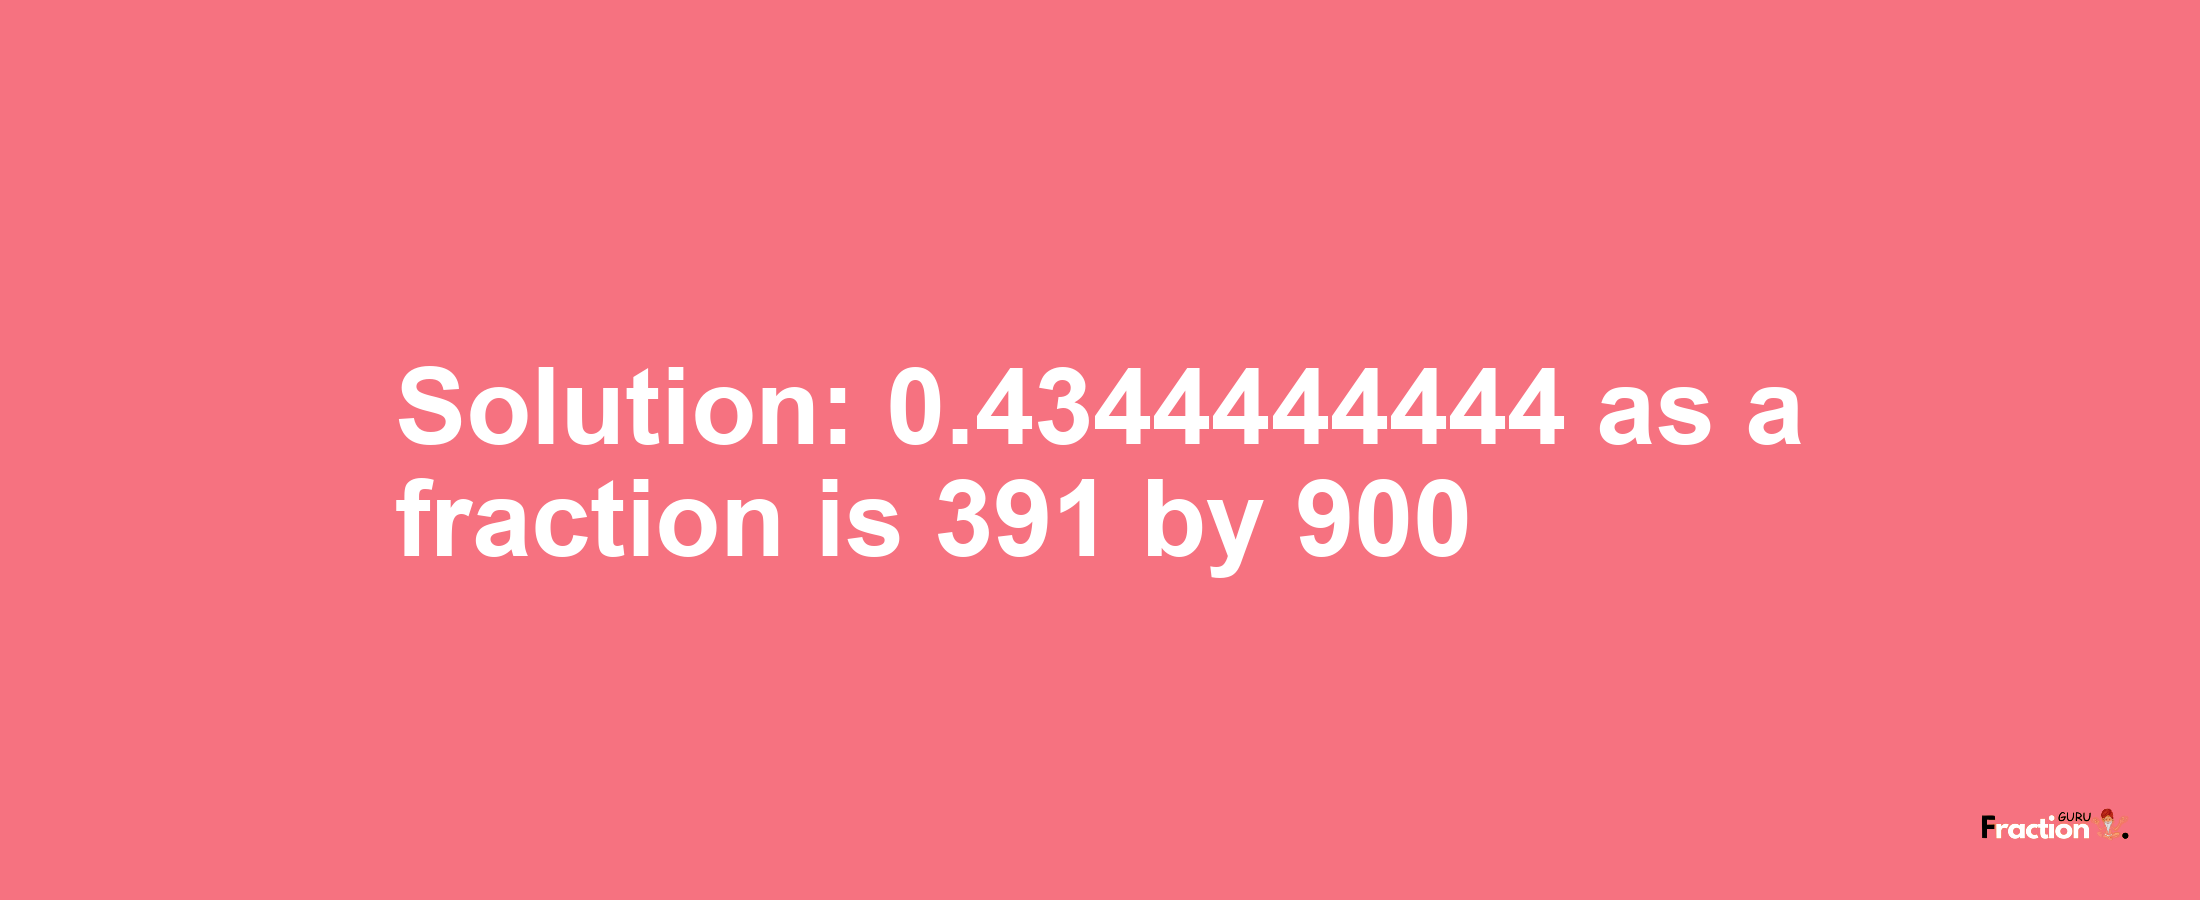 Solution:0.4344444444 as a fraction is 391/900